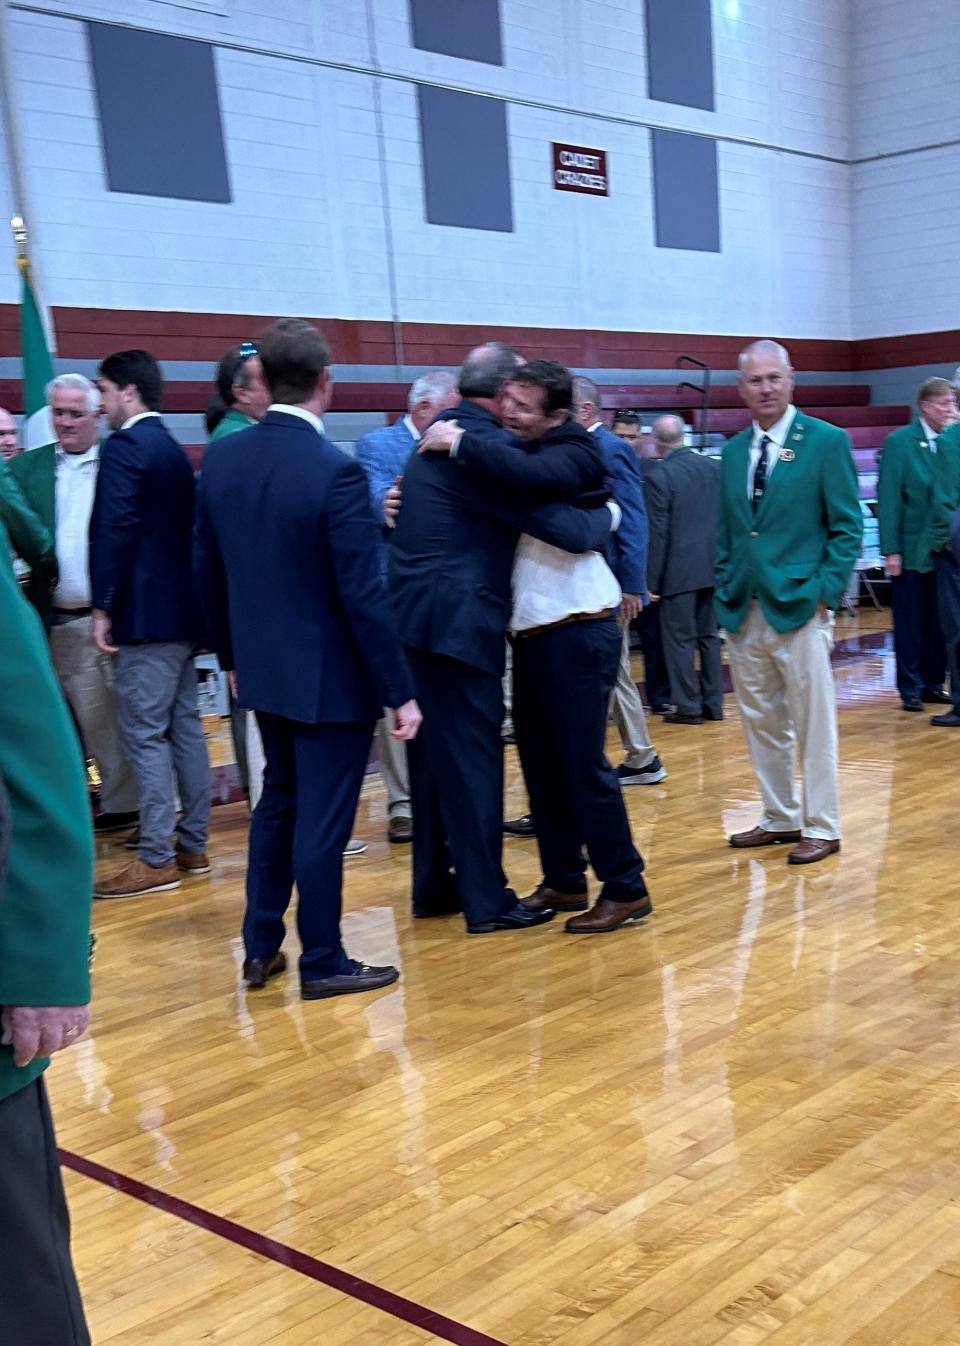 Members of the Savannah Saint Patrick's Day Parade Committee take turns congratulating John Forbes as the newly crowned Grand Marshal for the 200th anniversary of the parade.